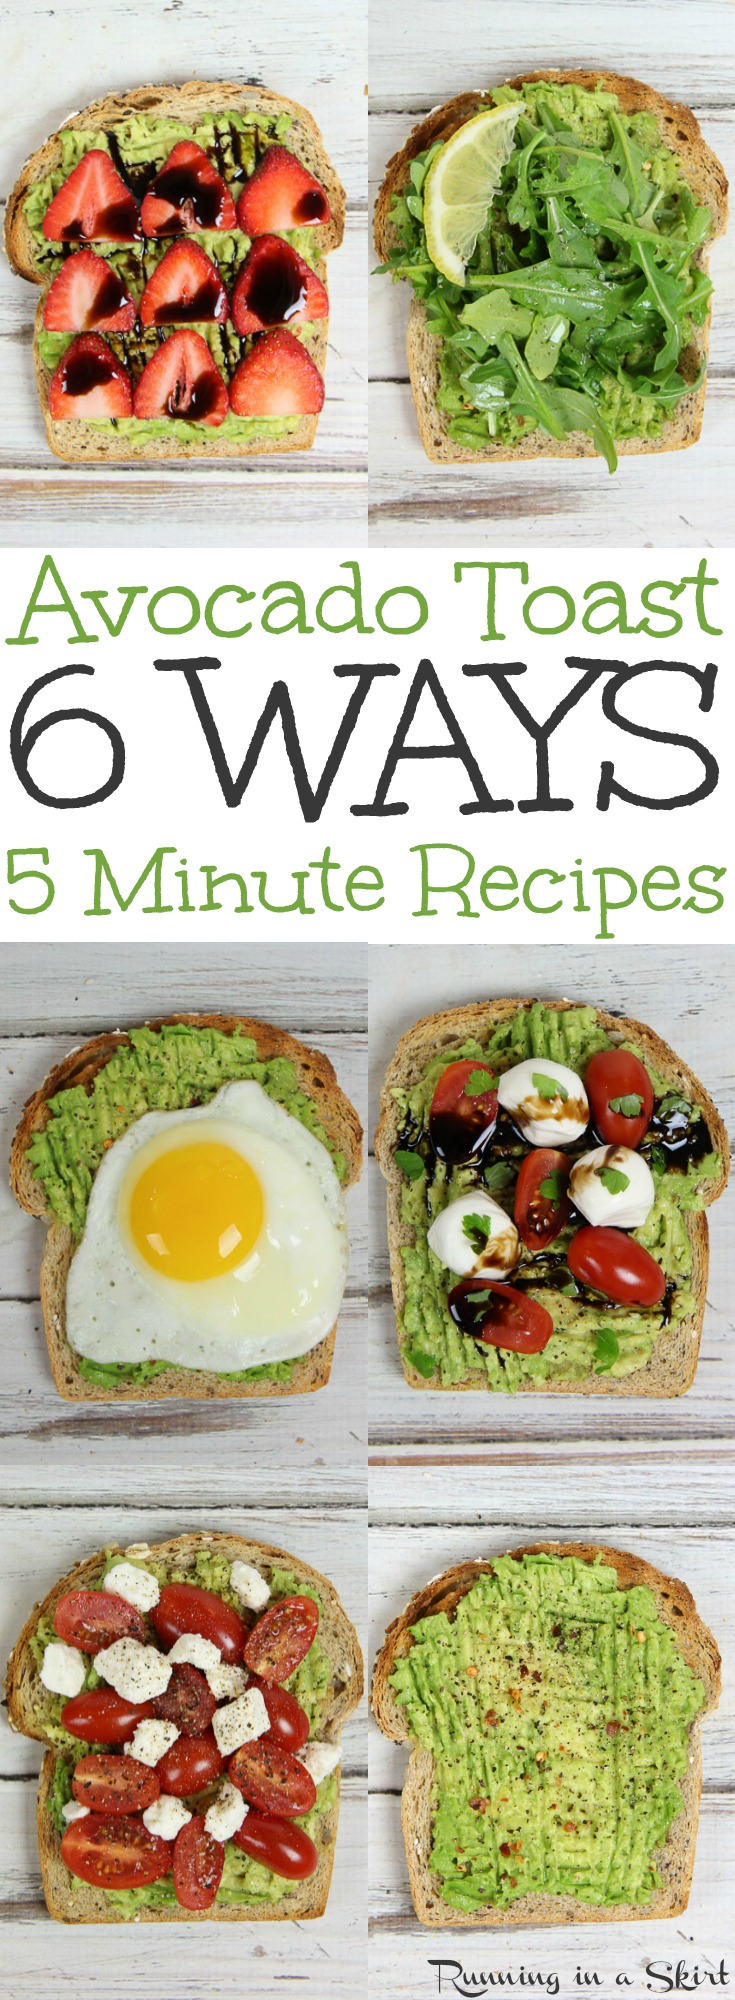 Easy Avocado Toast Recipe - 6 Ways!  The best, simple 5 minute recipes for easy breakfast, lunches and healthy snacks.  Includes pretty vegan options and with an egg.  Classic tomato, feta, arugula, balsamic and strawberries are also featured.  Starts with the basic recipe spread and builds from there!  Includes the best bread to use to make avocado toast. / Running in a Skirt via @juliewunder